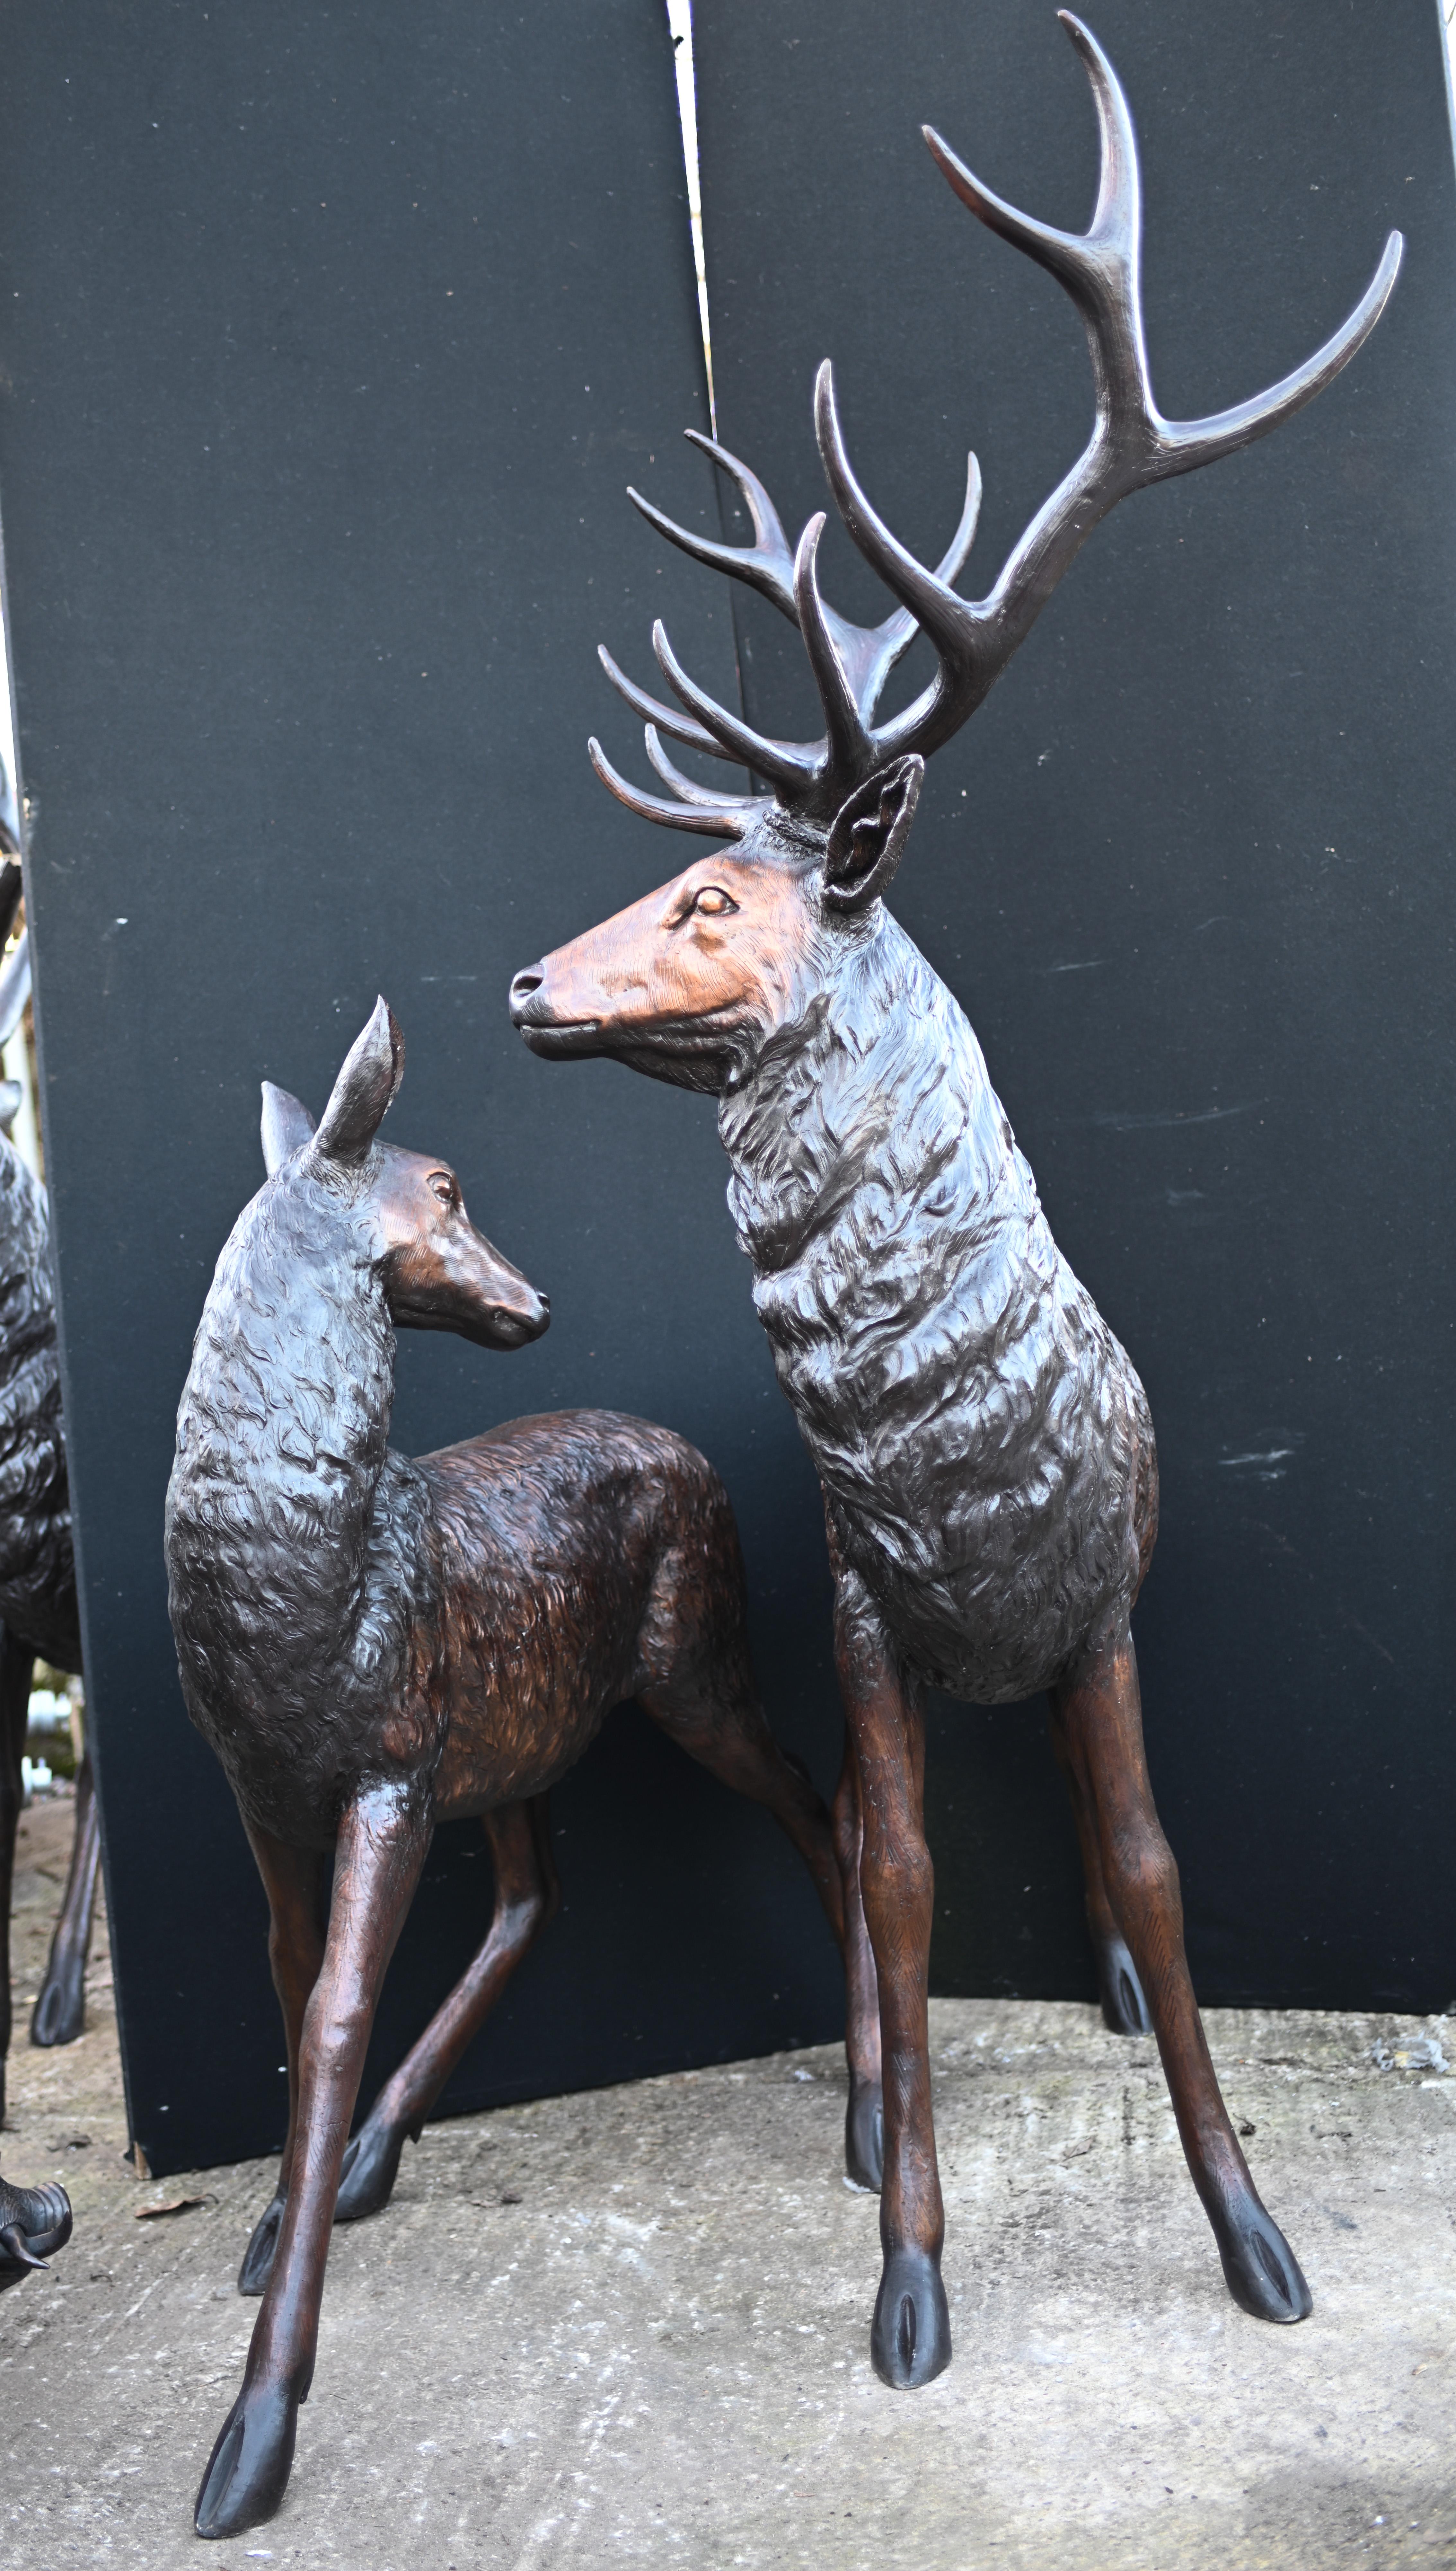 Gorgeous bronze duo of a stag and a deer
Lifesize set of Scottish Highland creatures
Wonderful patina to the bronze and the casting is superb quality
Great work a Classic piece of art perfect for the garden
Of course being bronze this can live